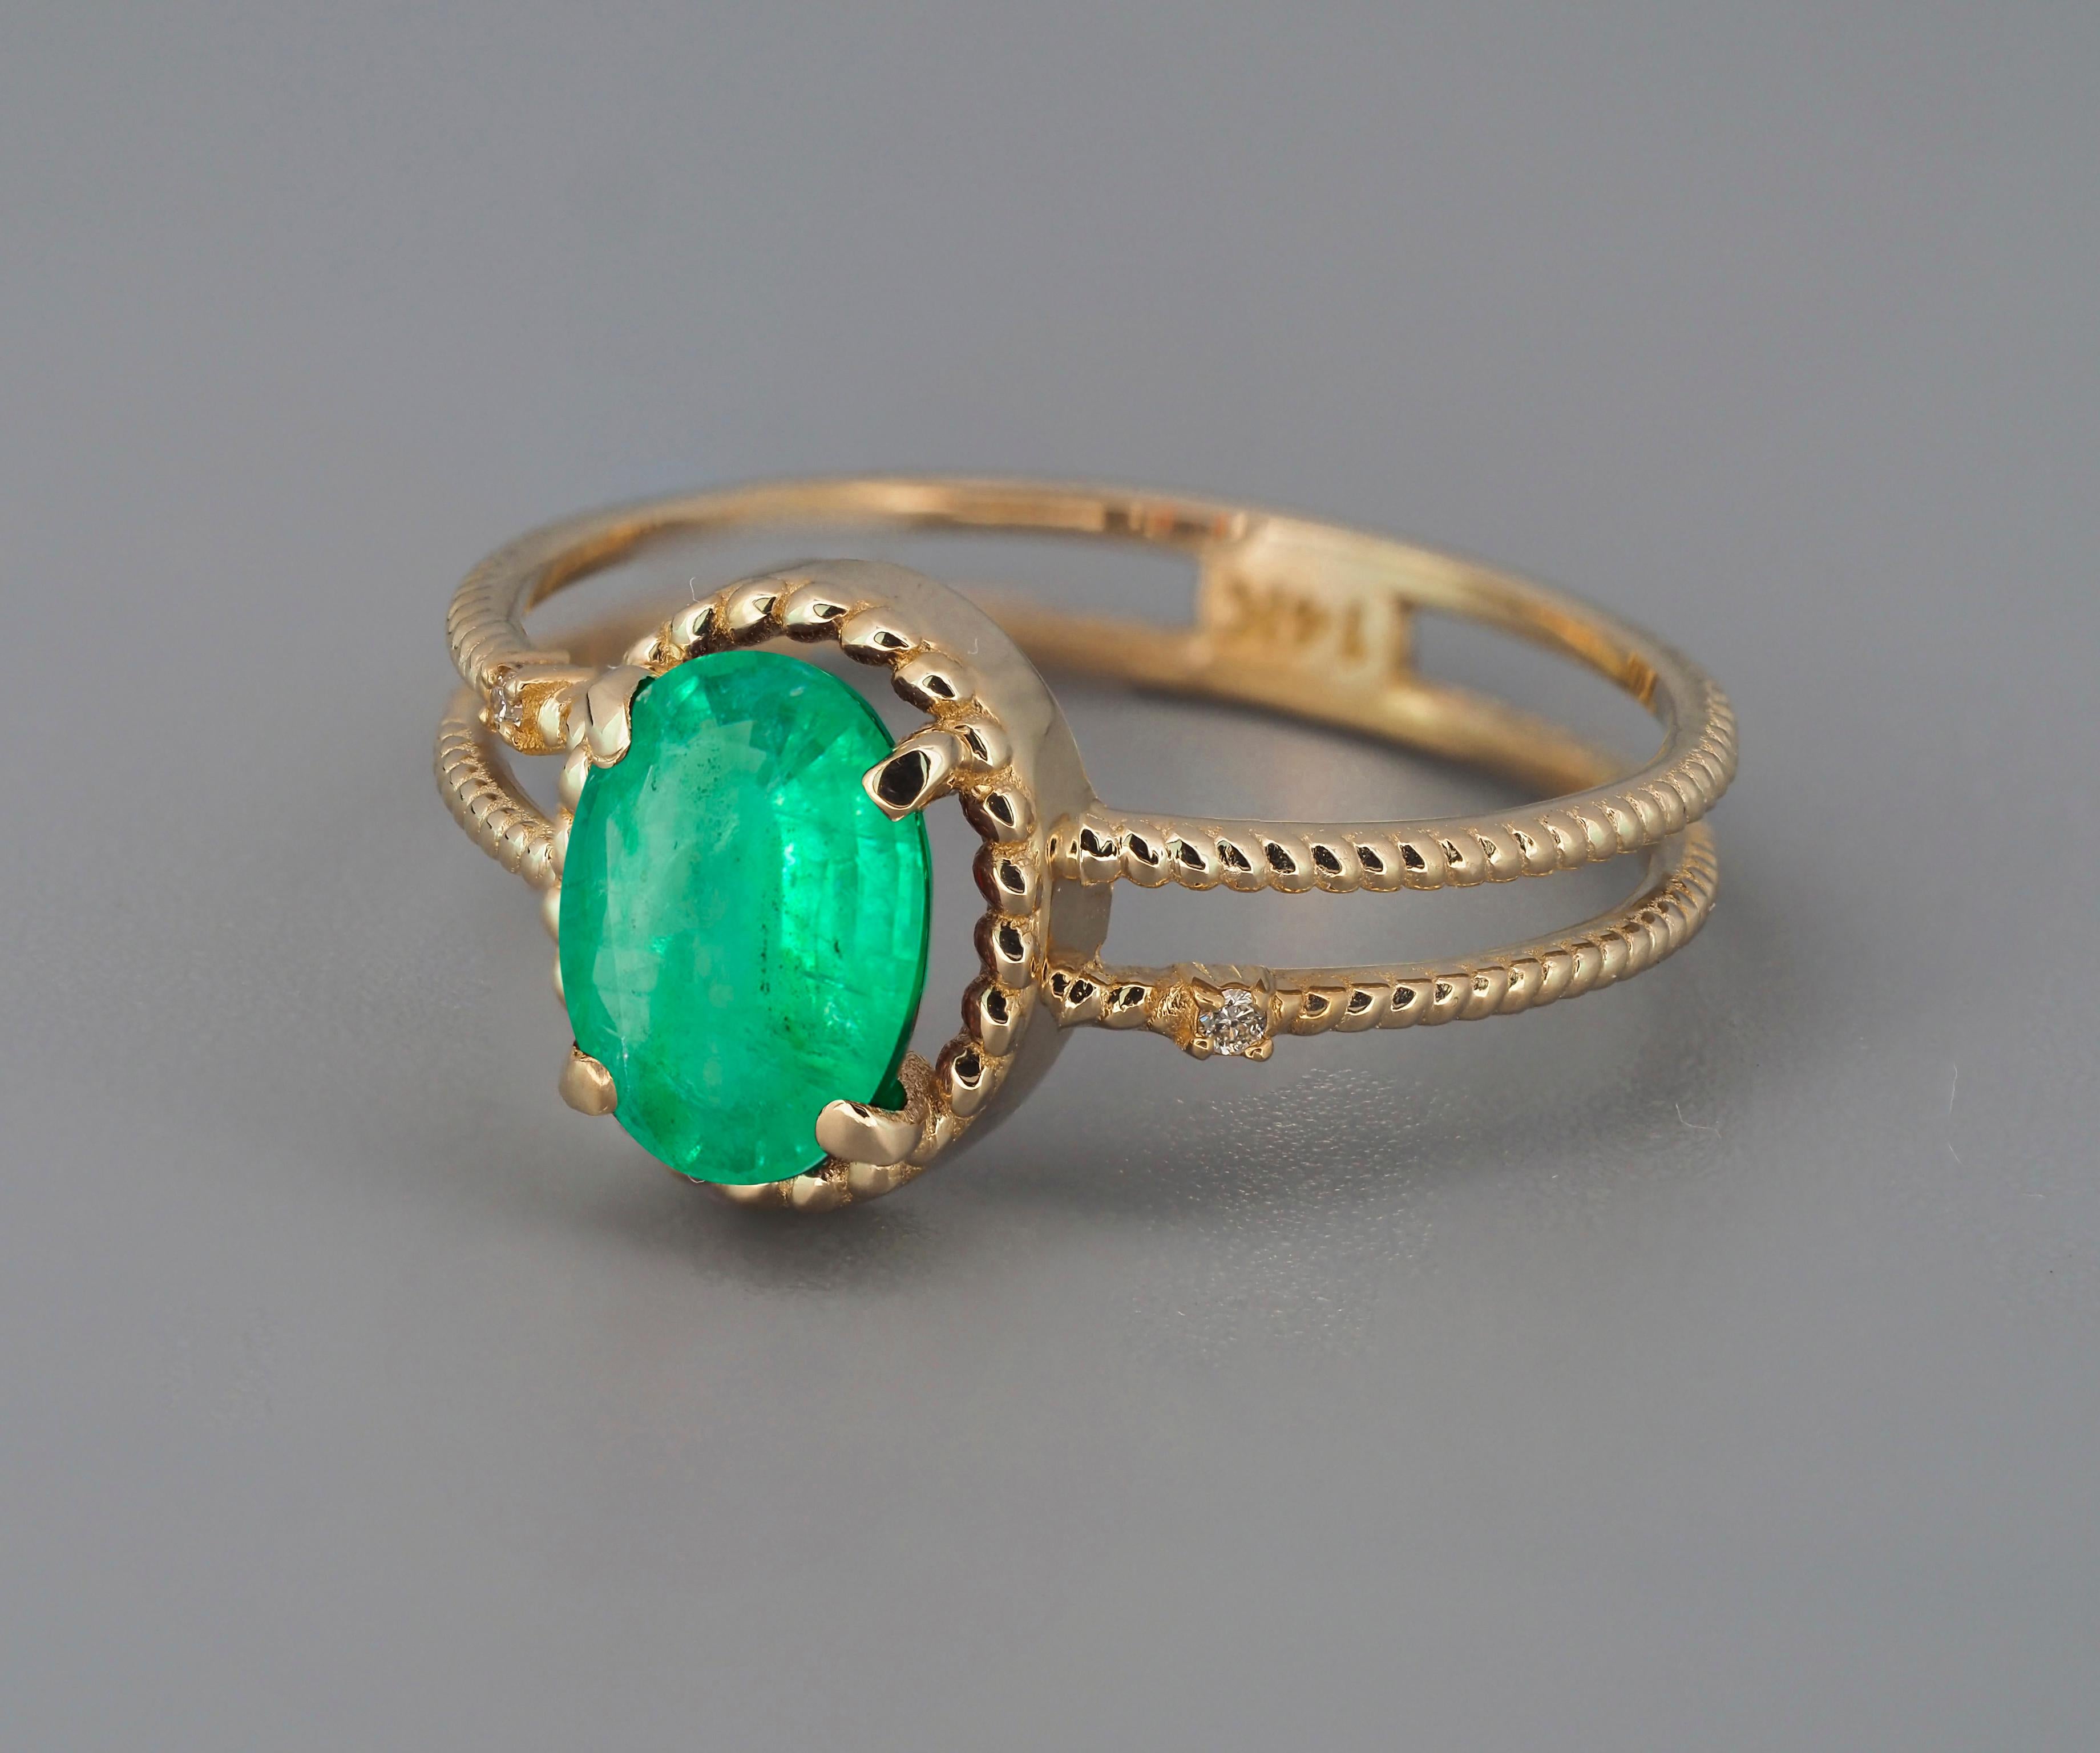 For Sale:  Emerald Gold Ring, Oval Emerald Ring, 14k Gold Ring with Emerald 4